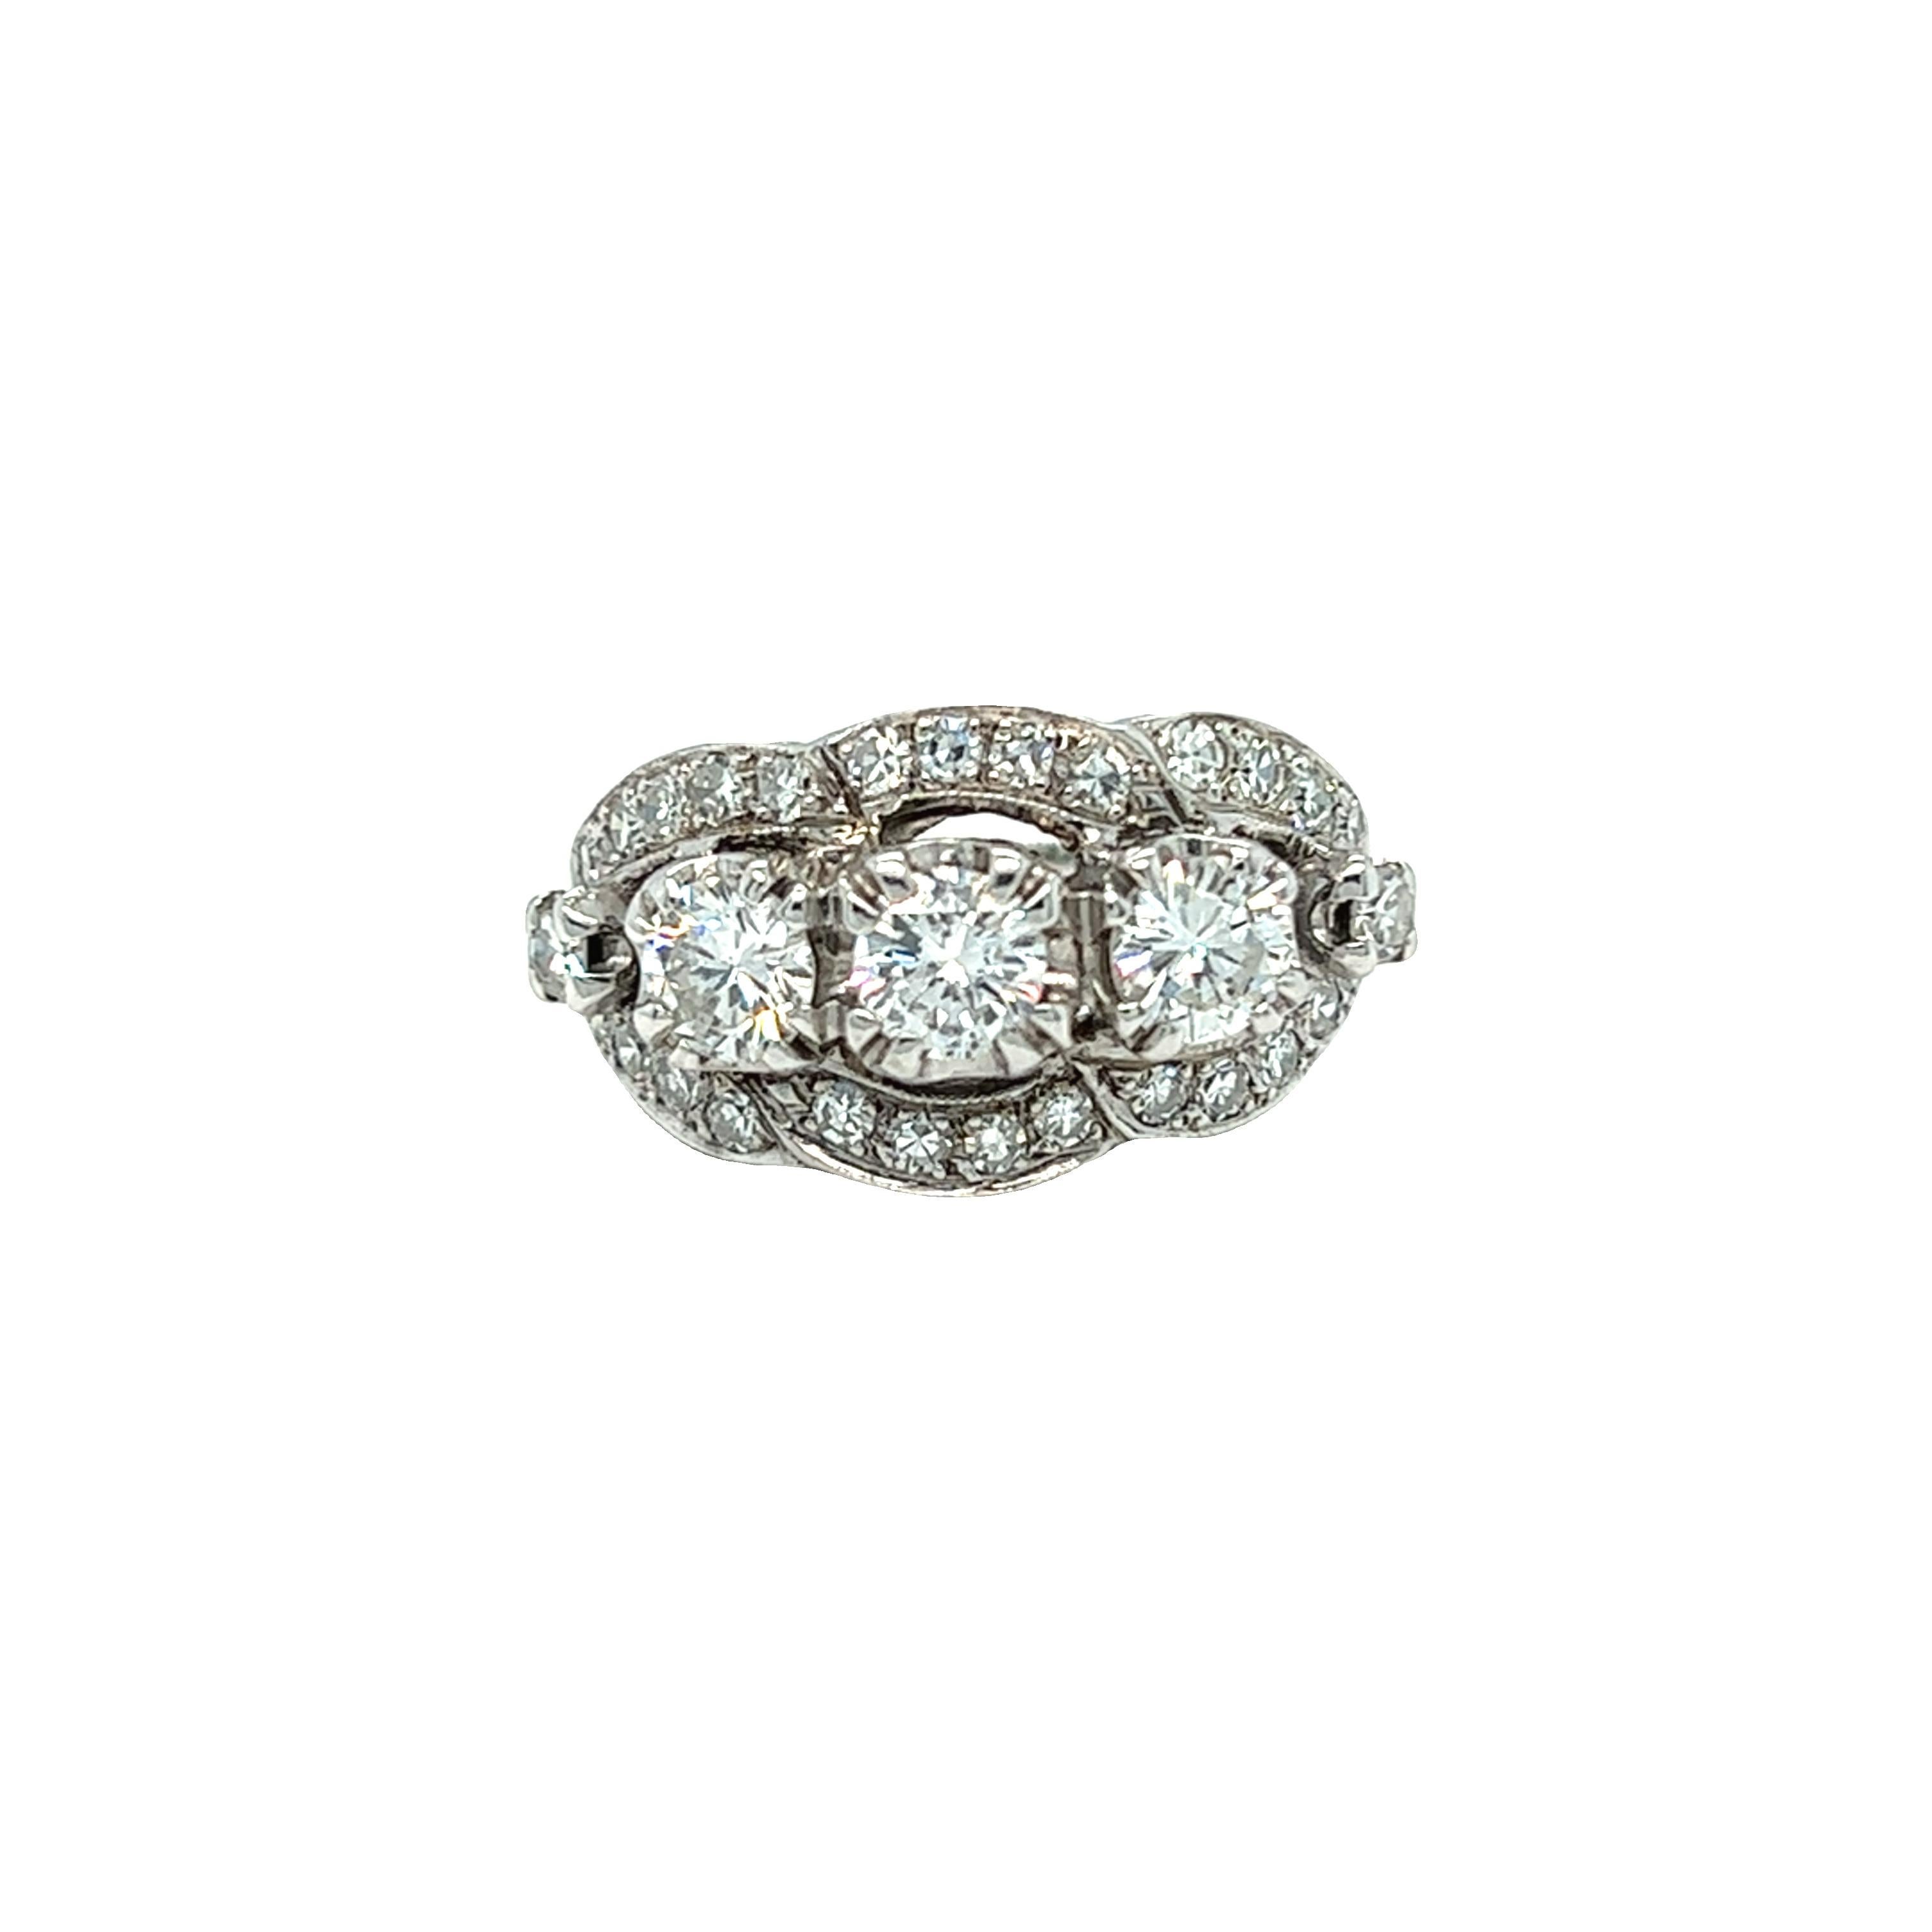 1.78 Cttw Vintage Three Stone Diamond Ring in 14K White Gold For Sale 2